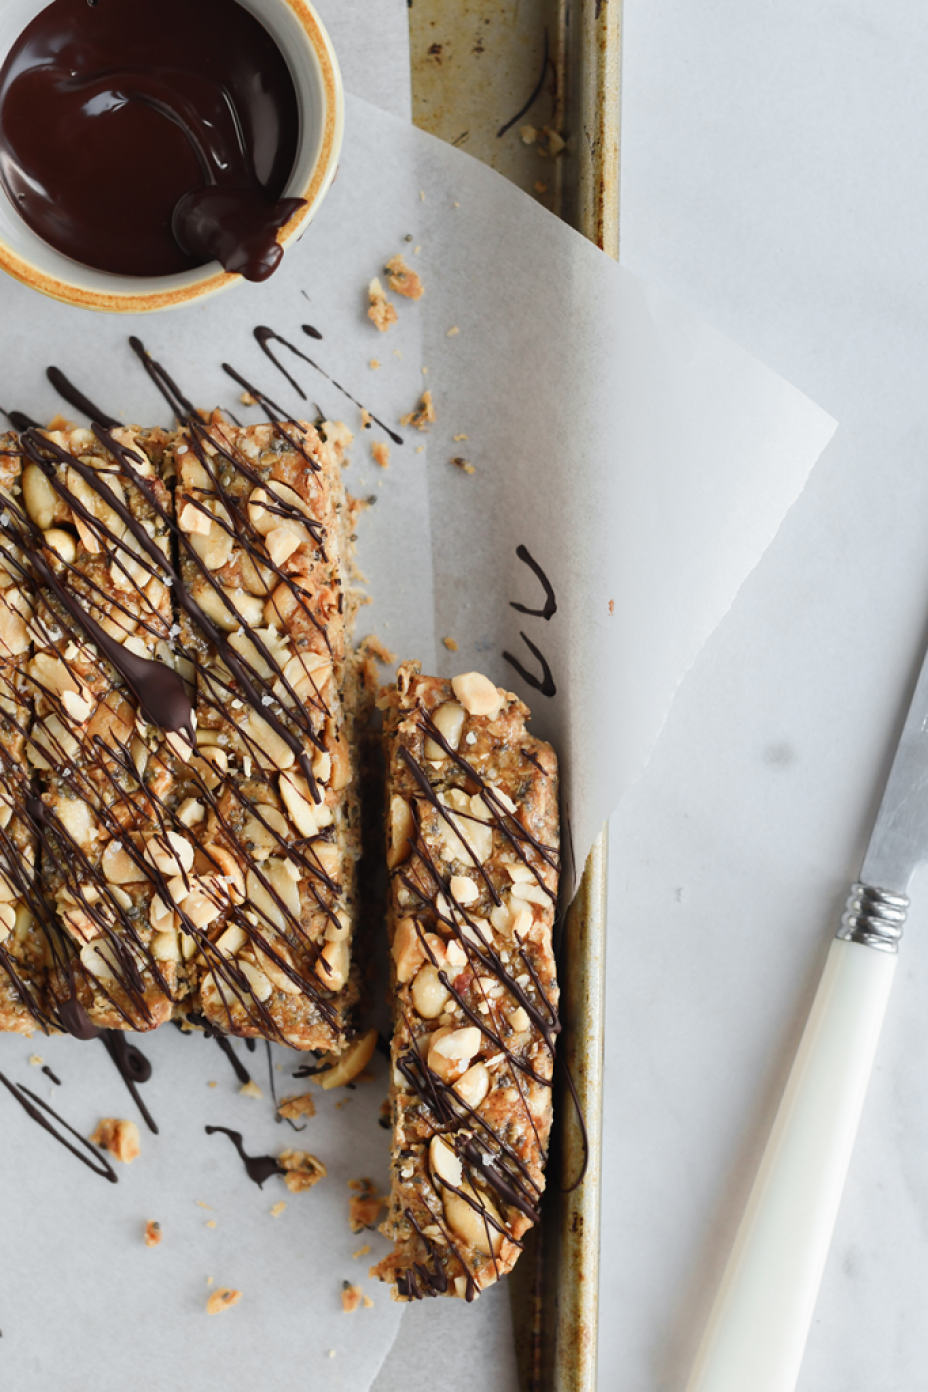 No bake peanut butter bars. A delicious and speedy mid afternoon pick me up